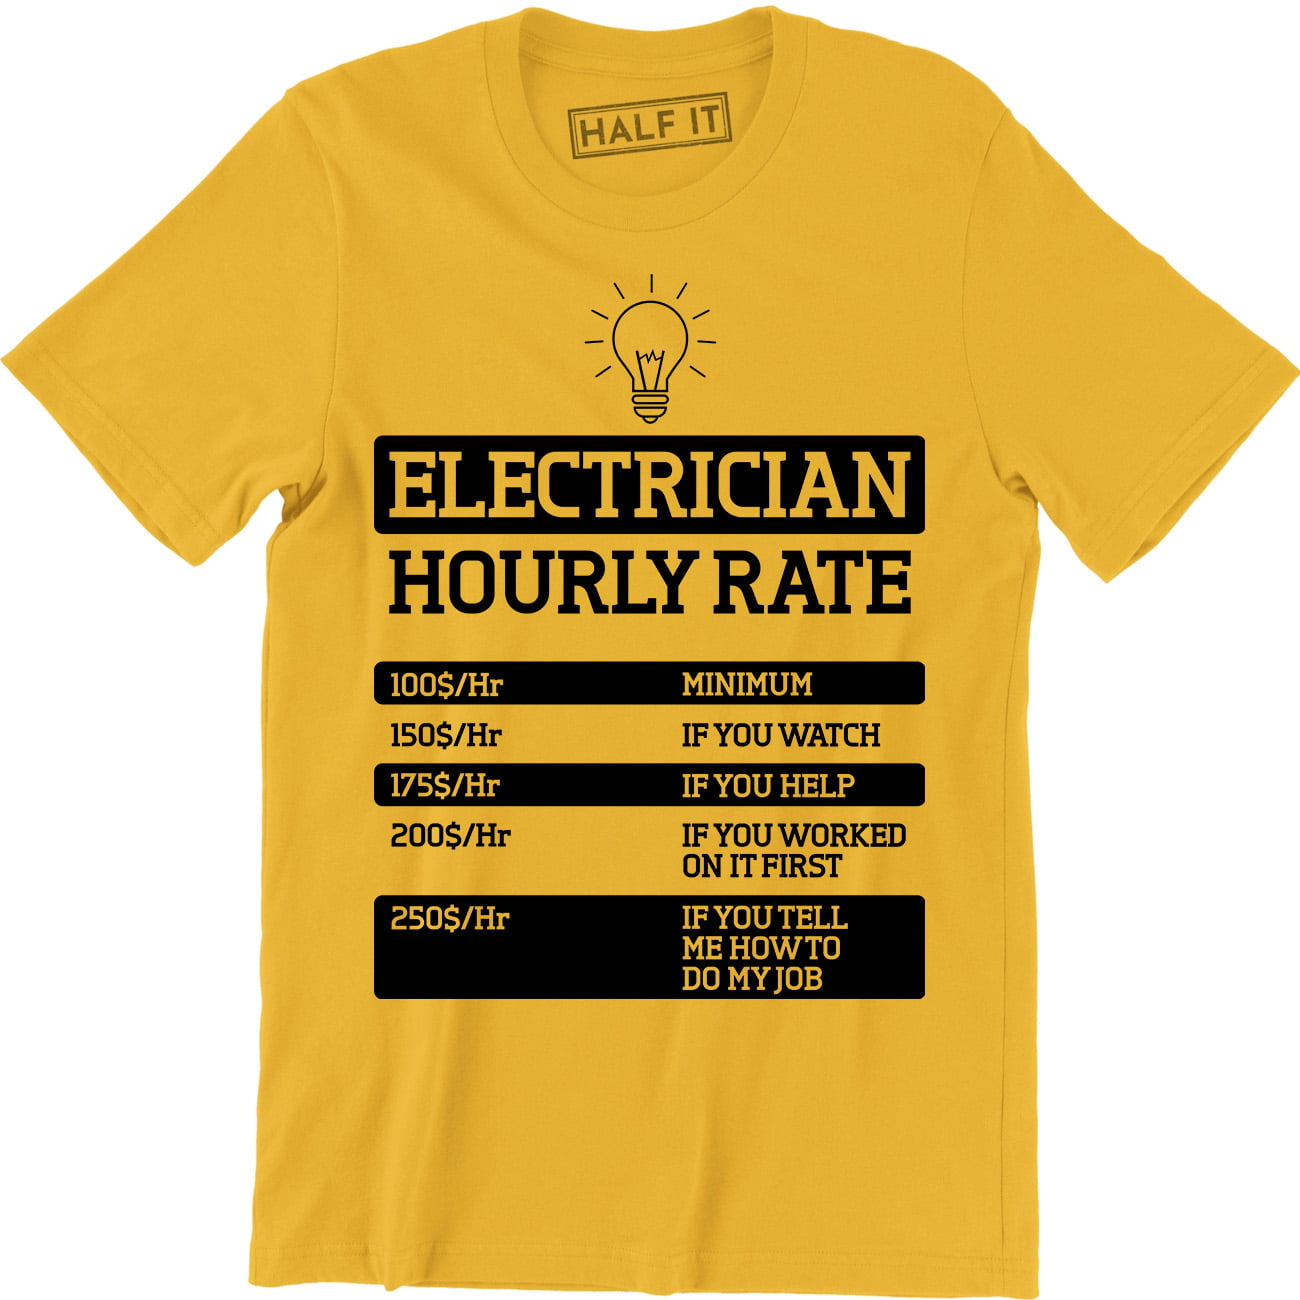 Im an Electrician I Cant Fix Stupid But Can Charge Hourly Unisex Sweatshirt